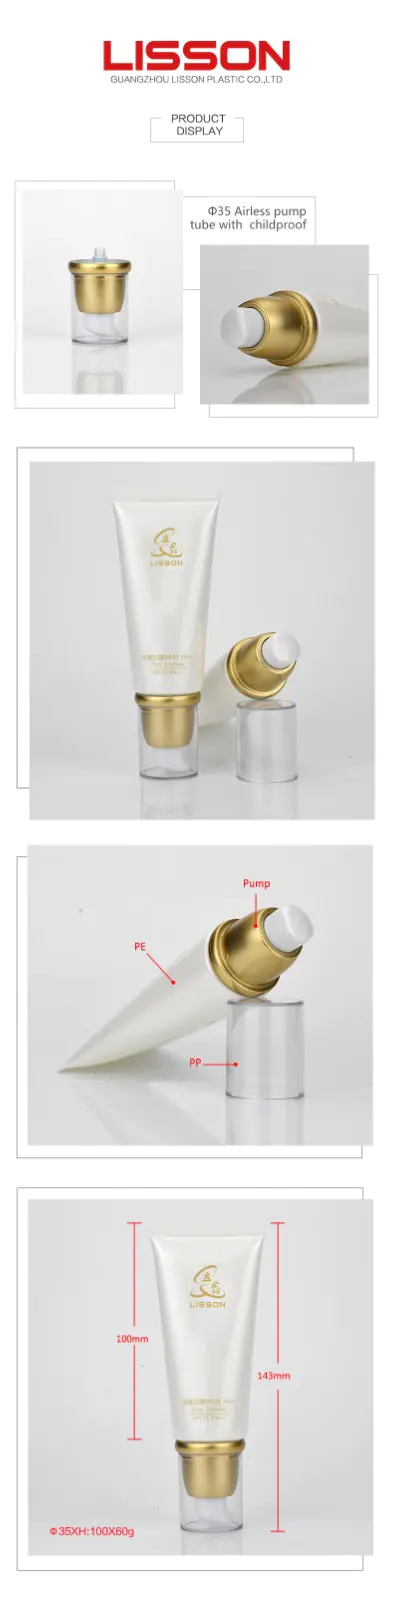 airless pump bottles packaging laminated for cosmetic